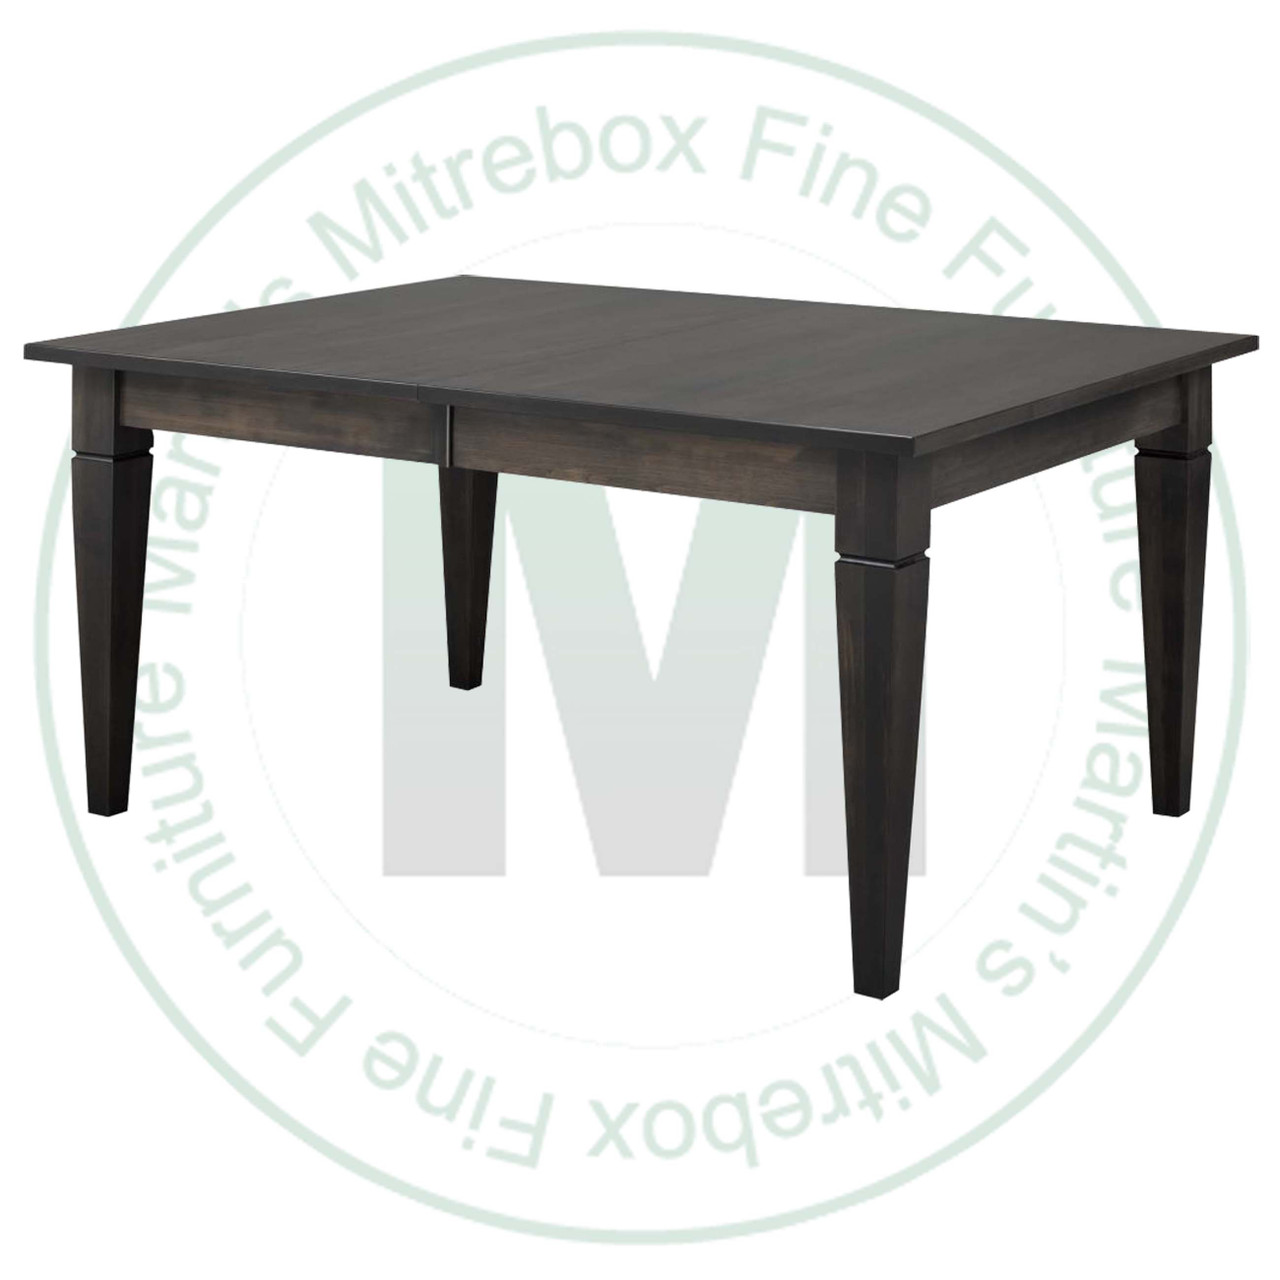 Wormy Maple Reesor Solid Top Harvest Table 42''D x 60''W x 30''H Table Has 1'' Thick Top And 2 - 16'' Extensions